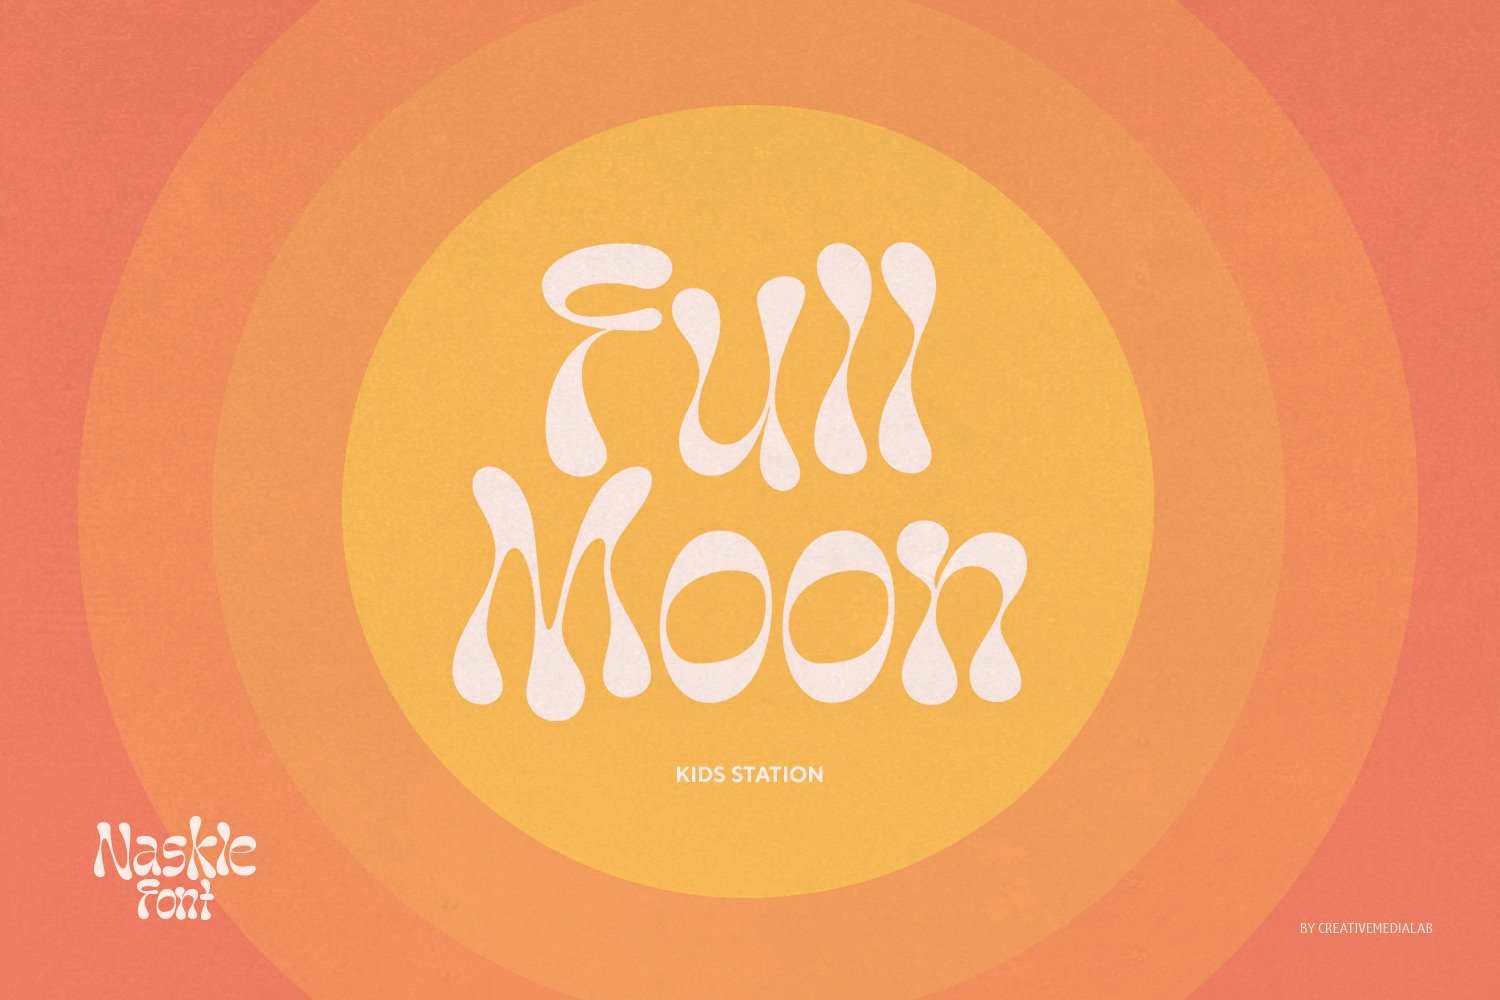 fullmoon by creative media lab naskle font 318